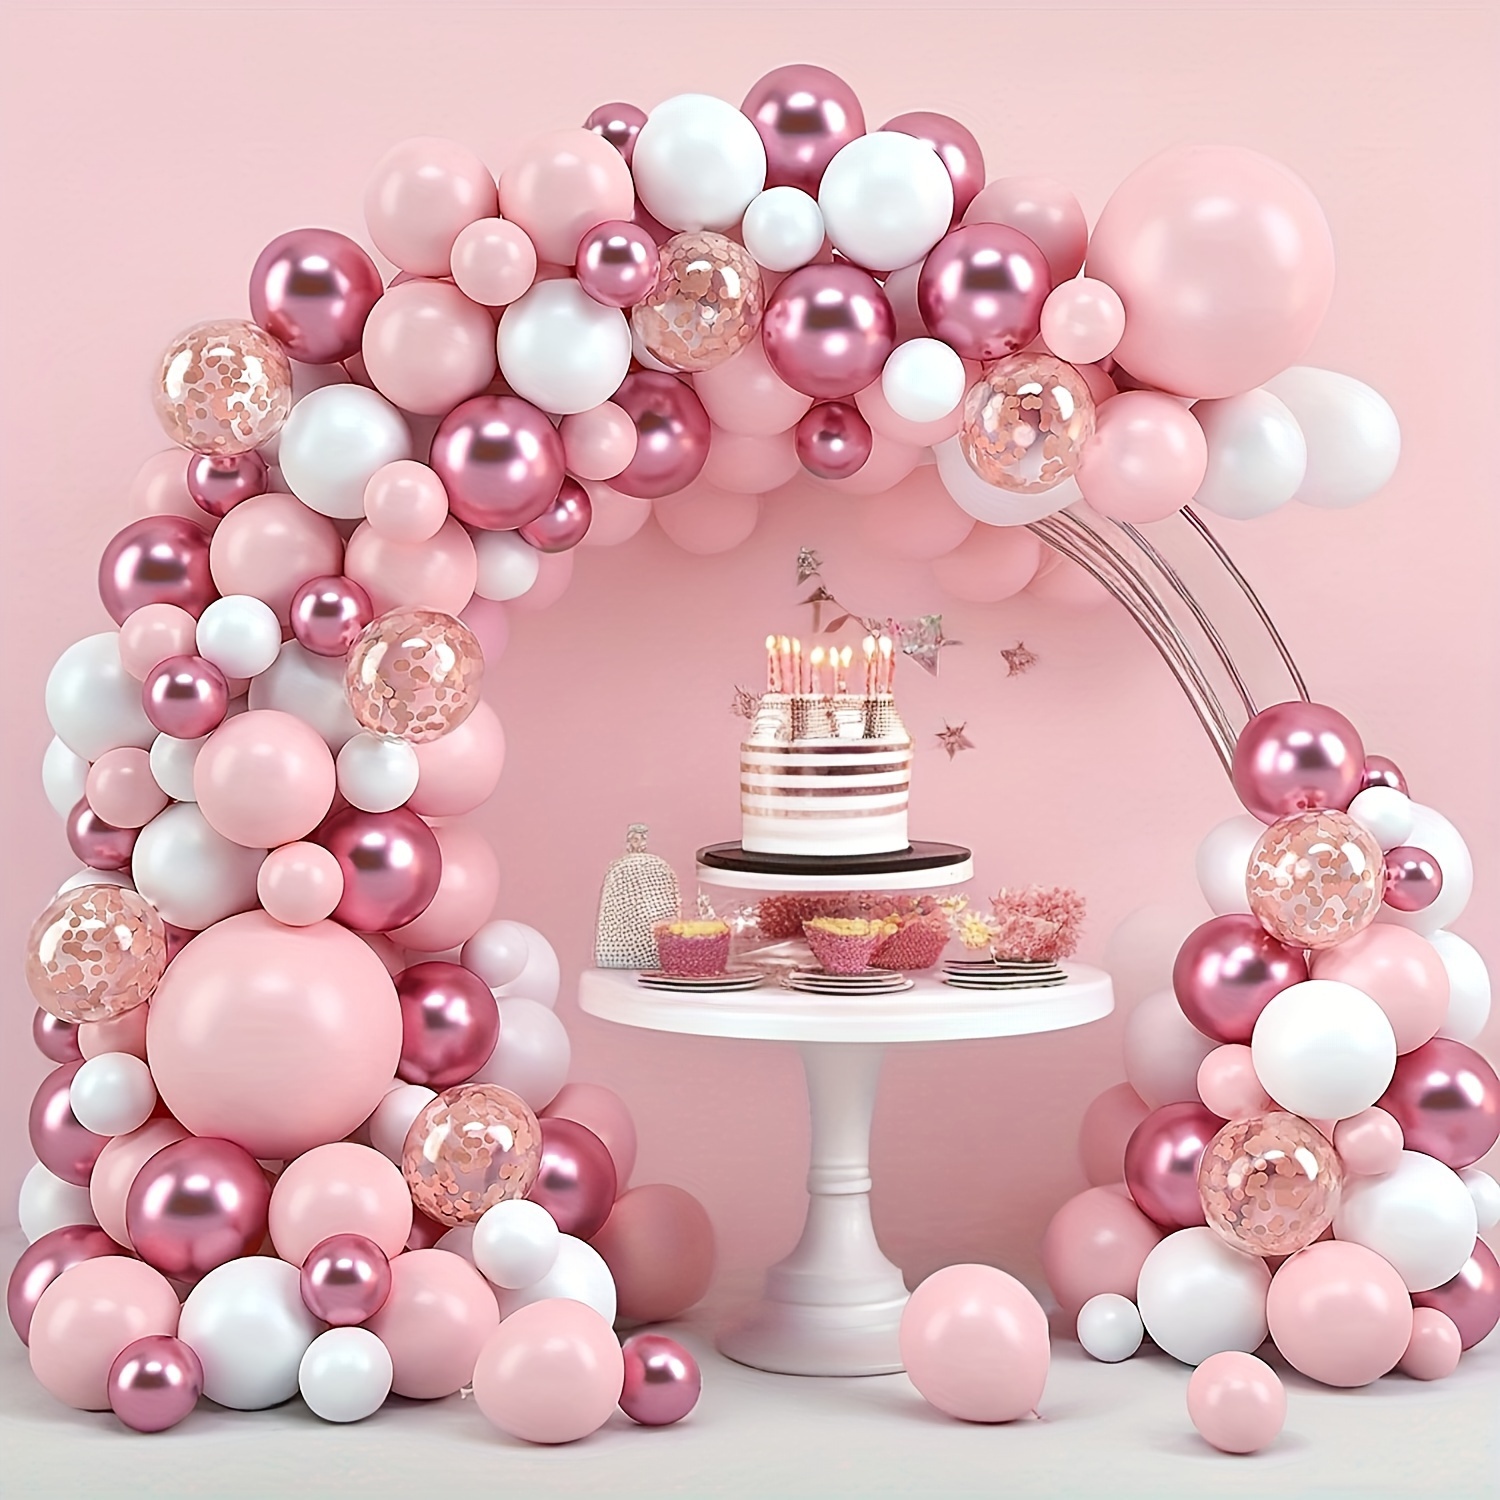 

Pink Balloon Arch Decor Set: Festive Wedding, Birthday, Anniversary, Valentine's Day Decorations - Metallic And Matte Balloons - Suitable For Kids Ages 3-12 - Latex Material